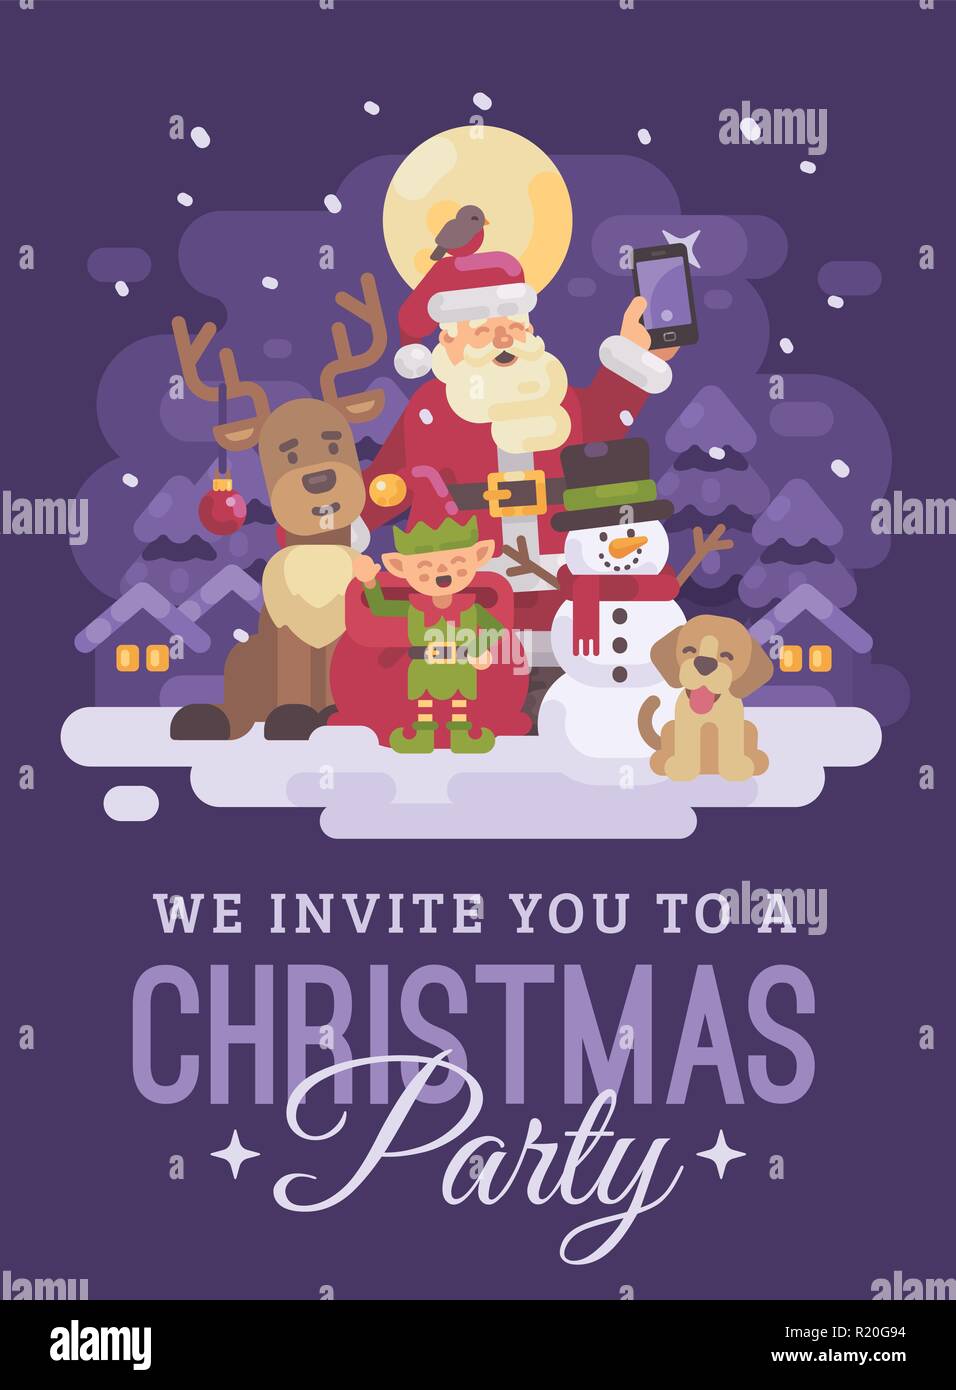 Santa Claus with reindeer, elf, snowman and dog taking a selfie in a snowy night winter village landscape. Christmas invitation card flat illustration Stock Vector